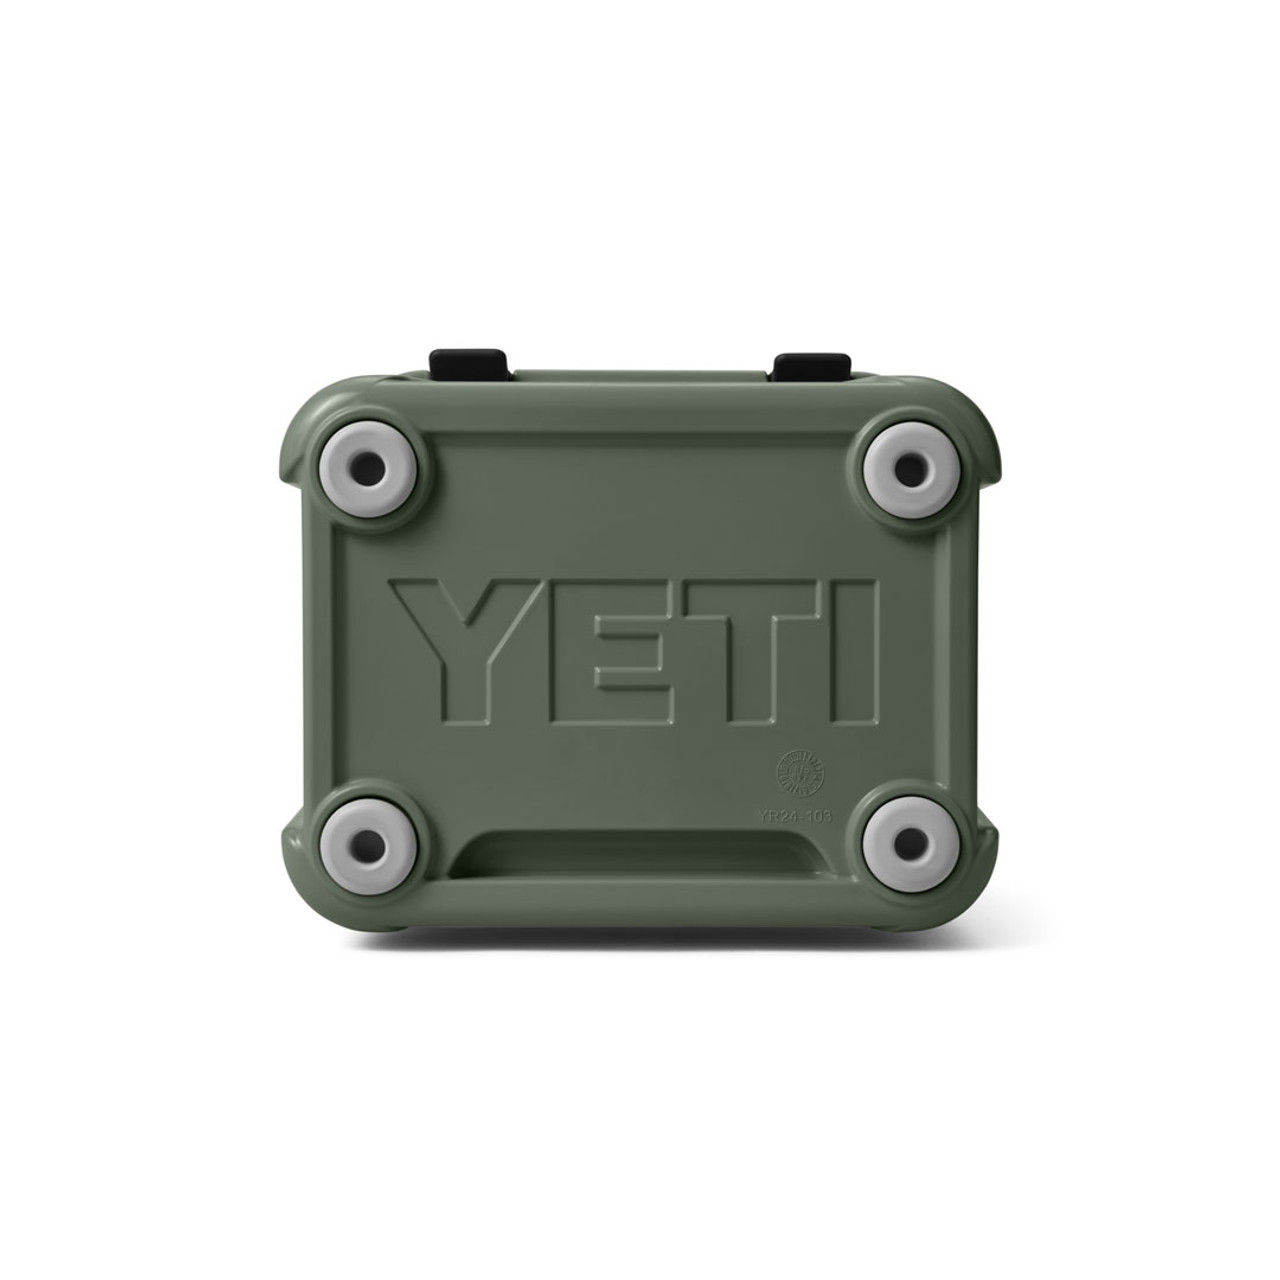 Camp Green : r/YetiCoolers